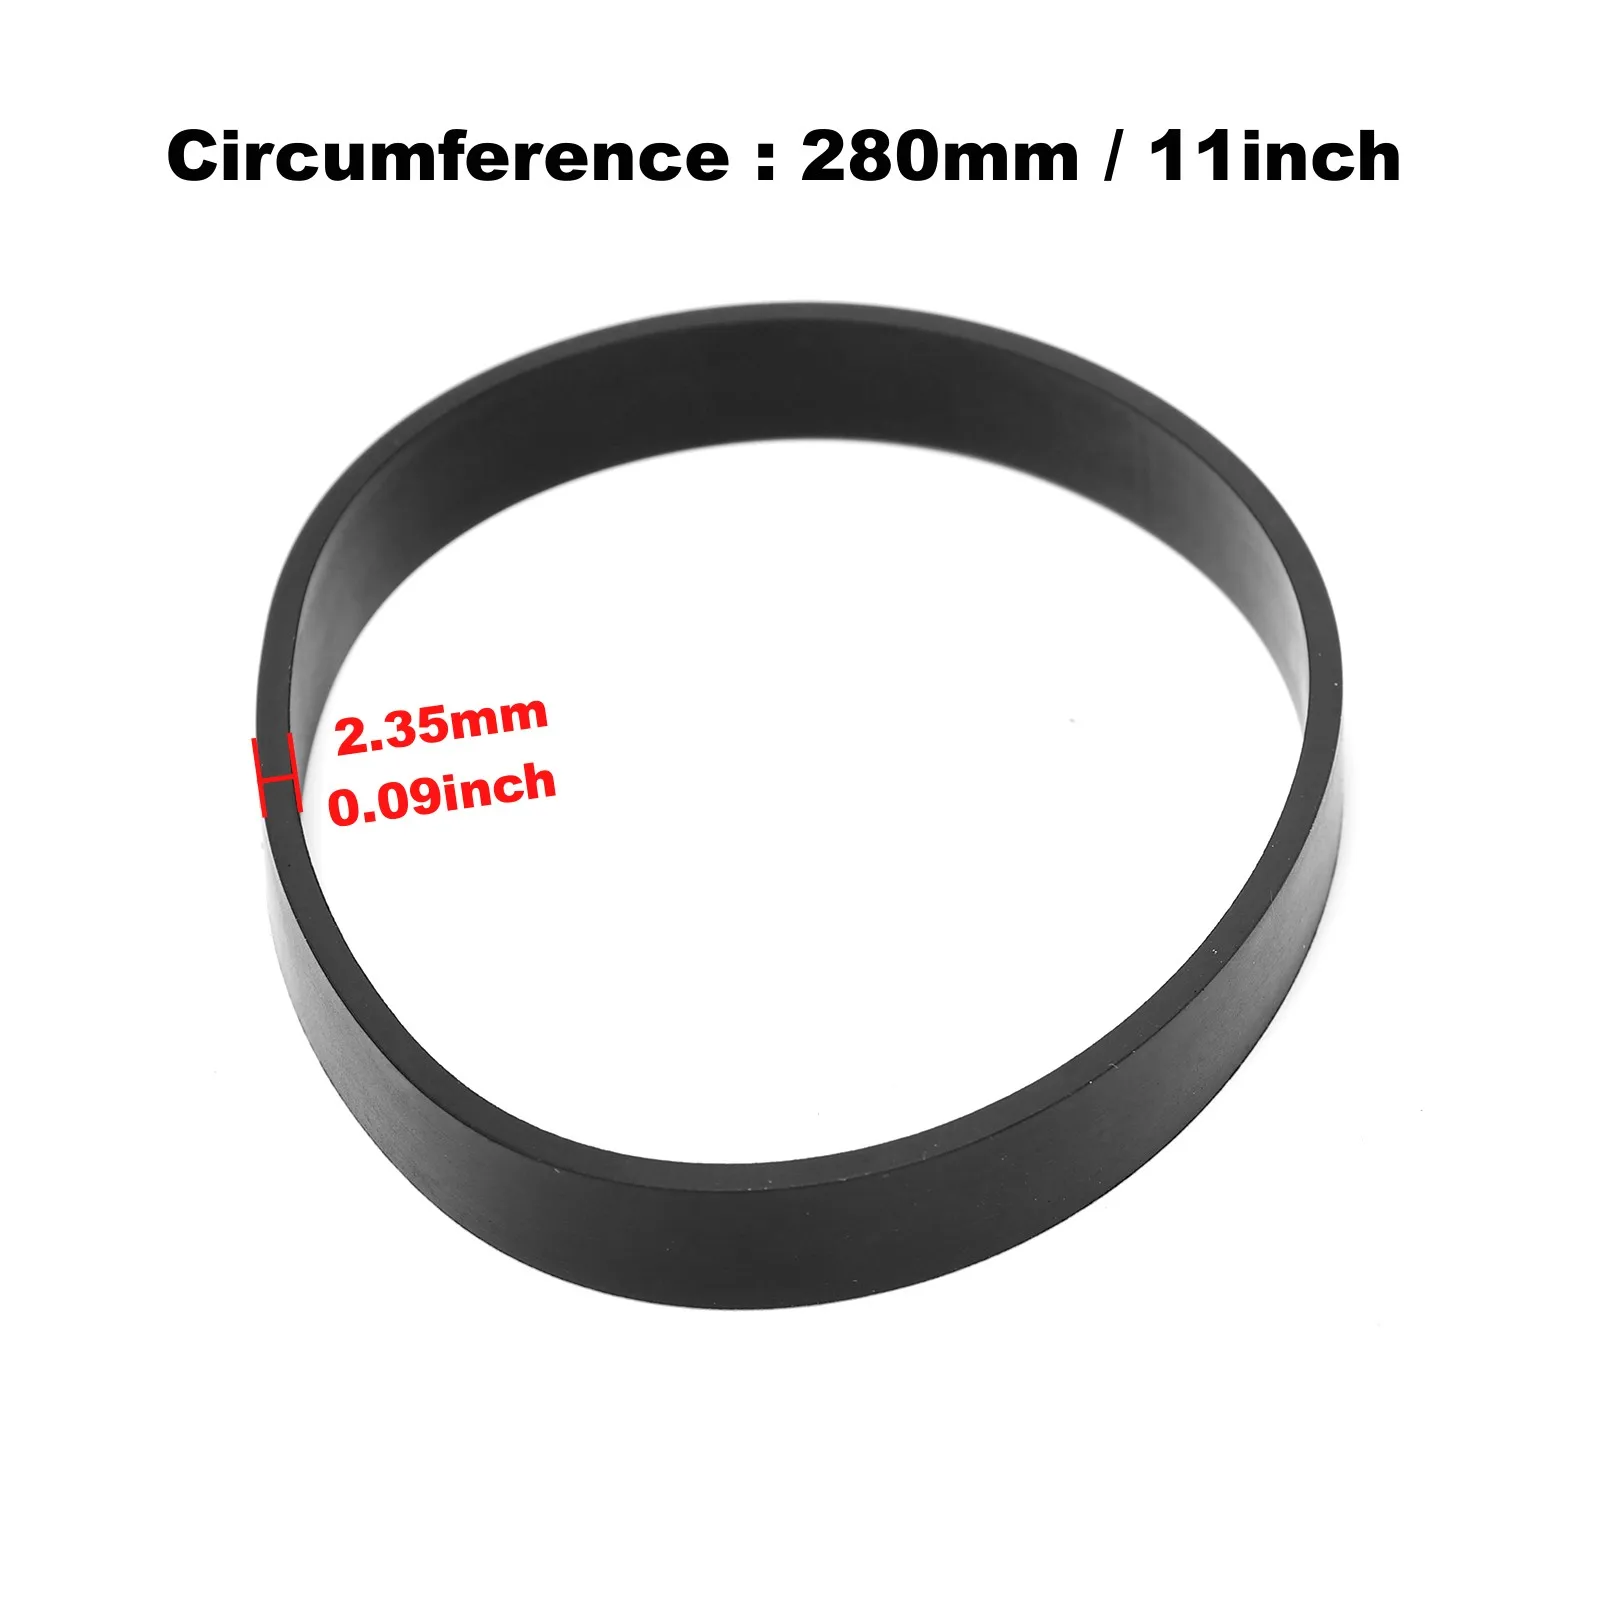 2pcs Vacuum Cleaner Drive Belt 1606428 (280mm Circumference, 12.5mm Width) Compatible with Bissell ProHeat 2X Revolution Pet Pro